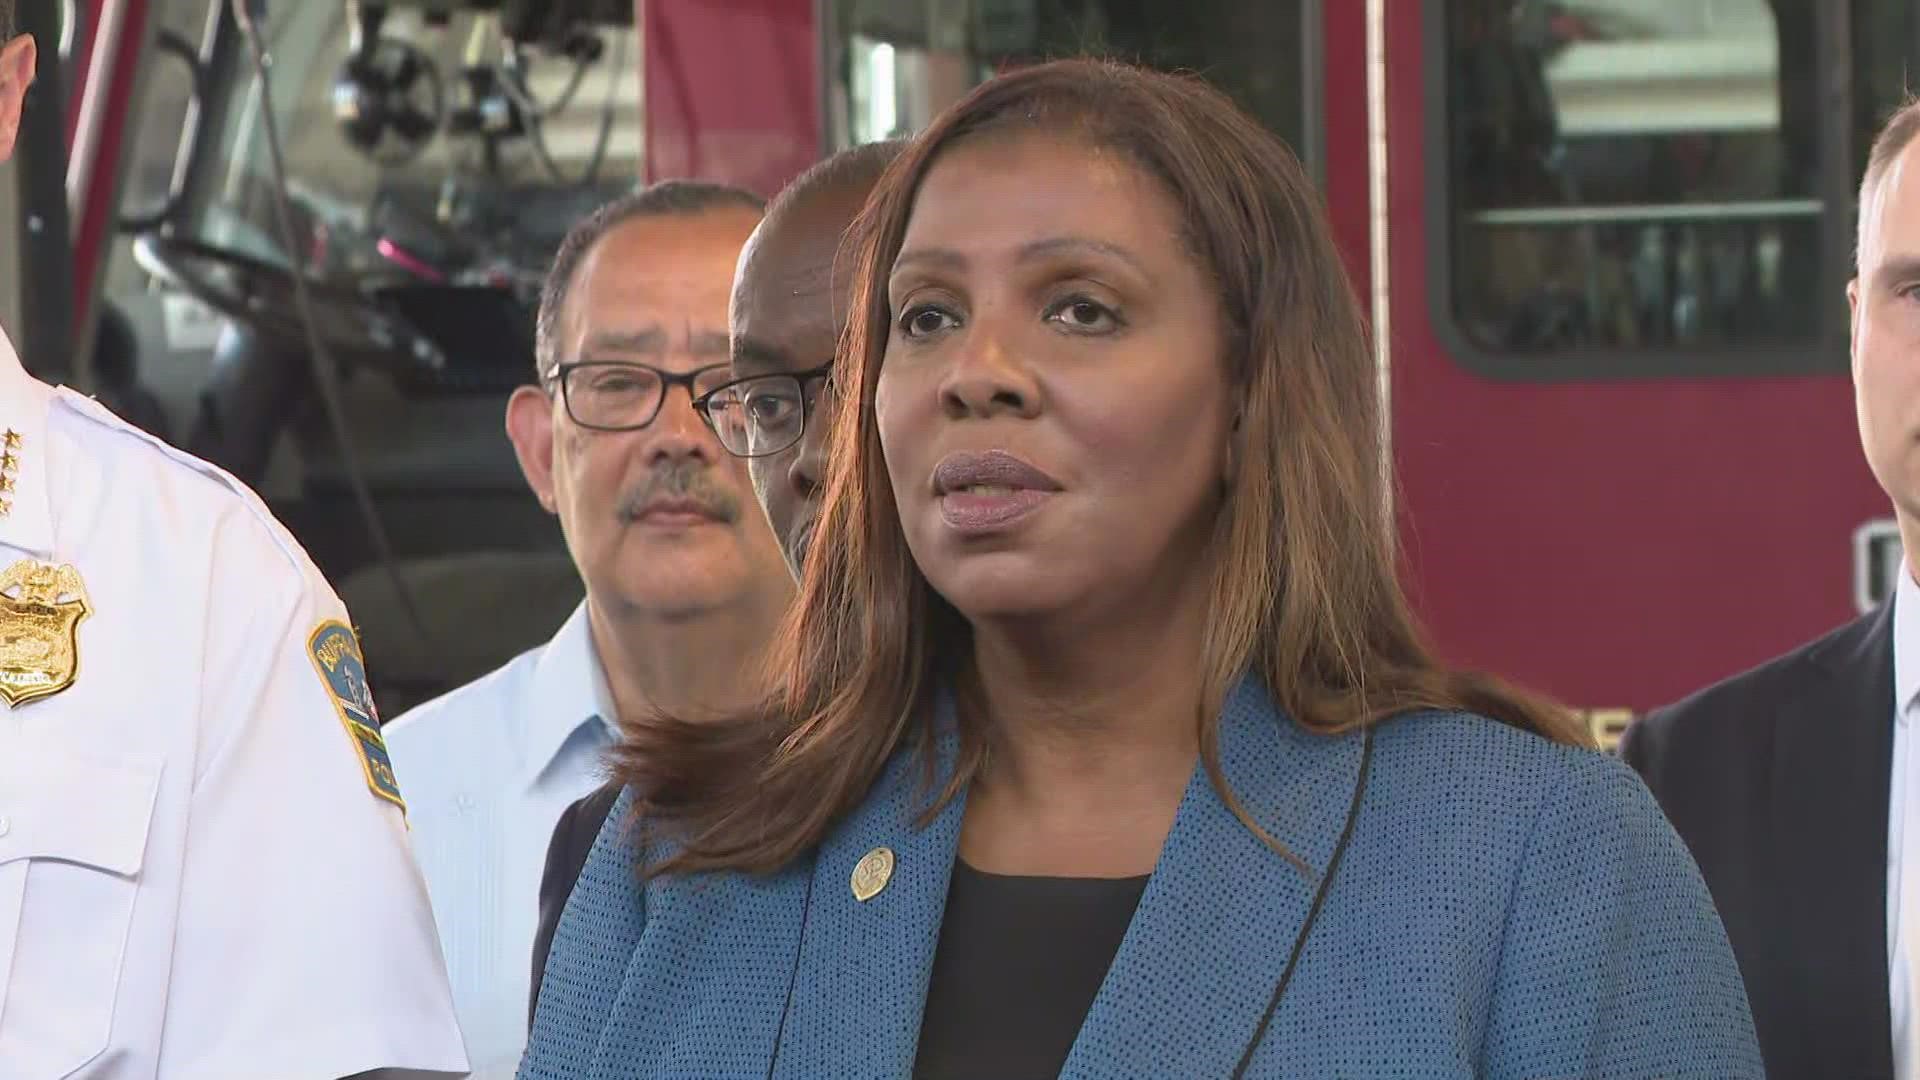 Buffalo Mass Shooting:  NYS Attorney General James says her office is investigating